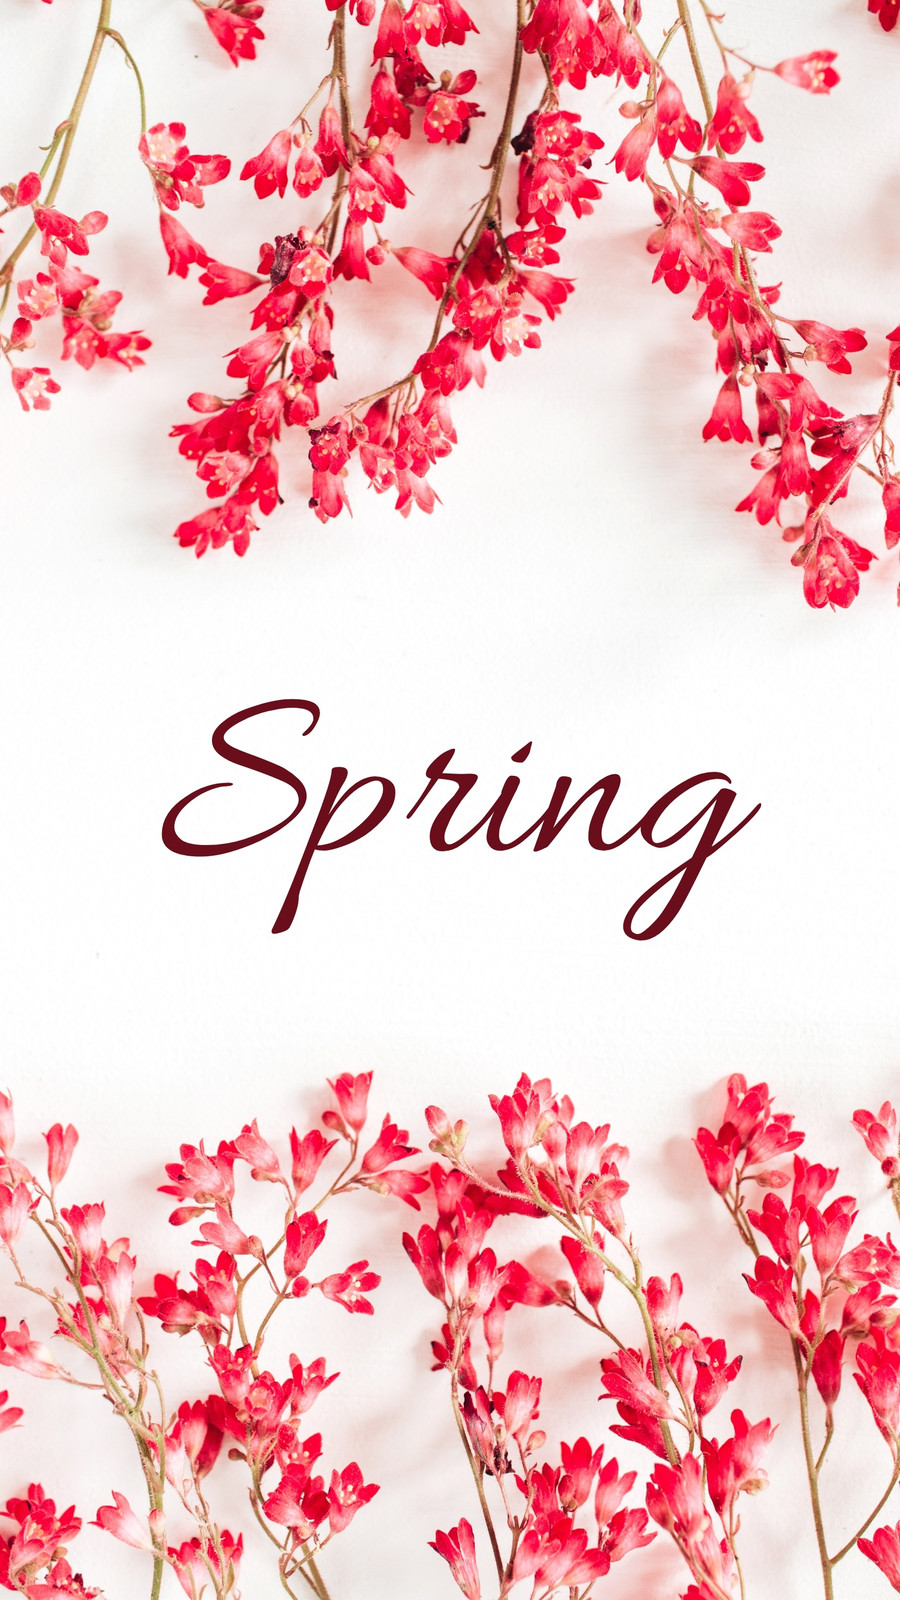 Customize 455+ Spring Aesthetic Phone Wallpaper Templates Online - Canva